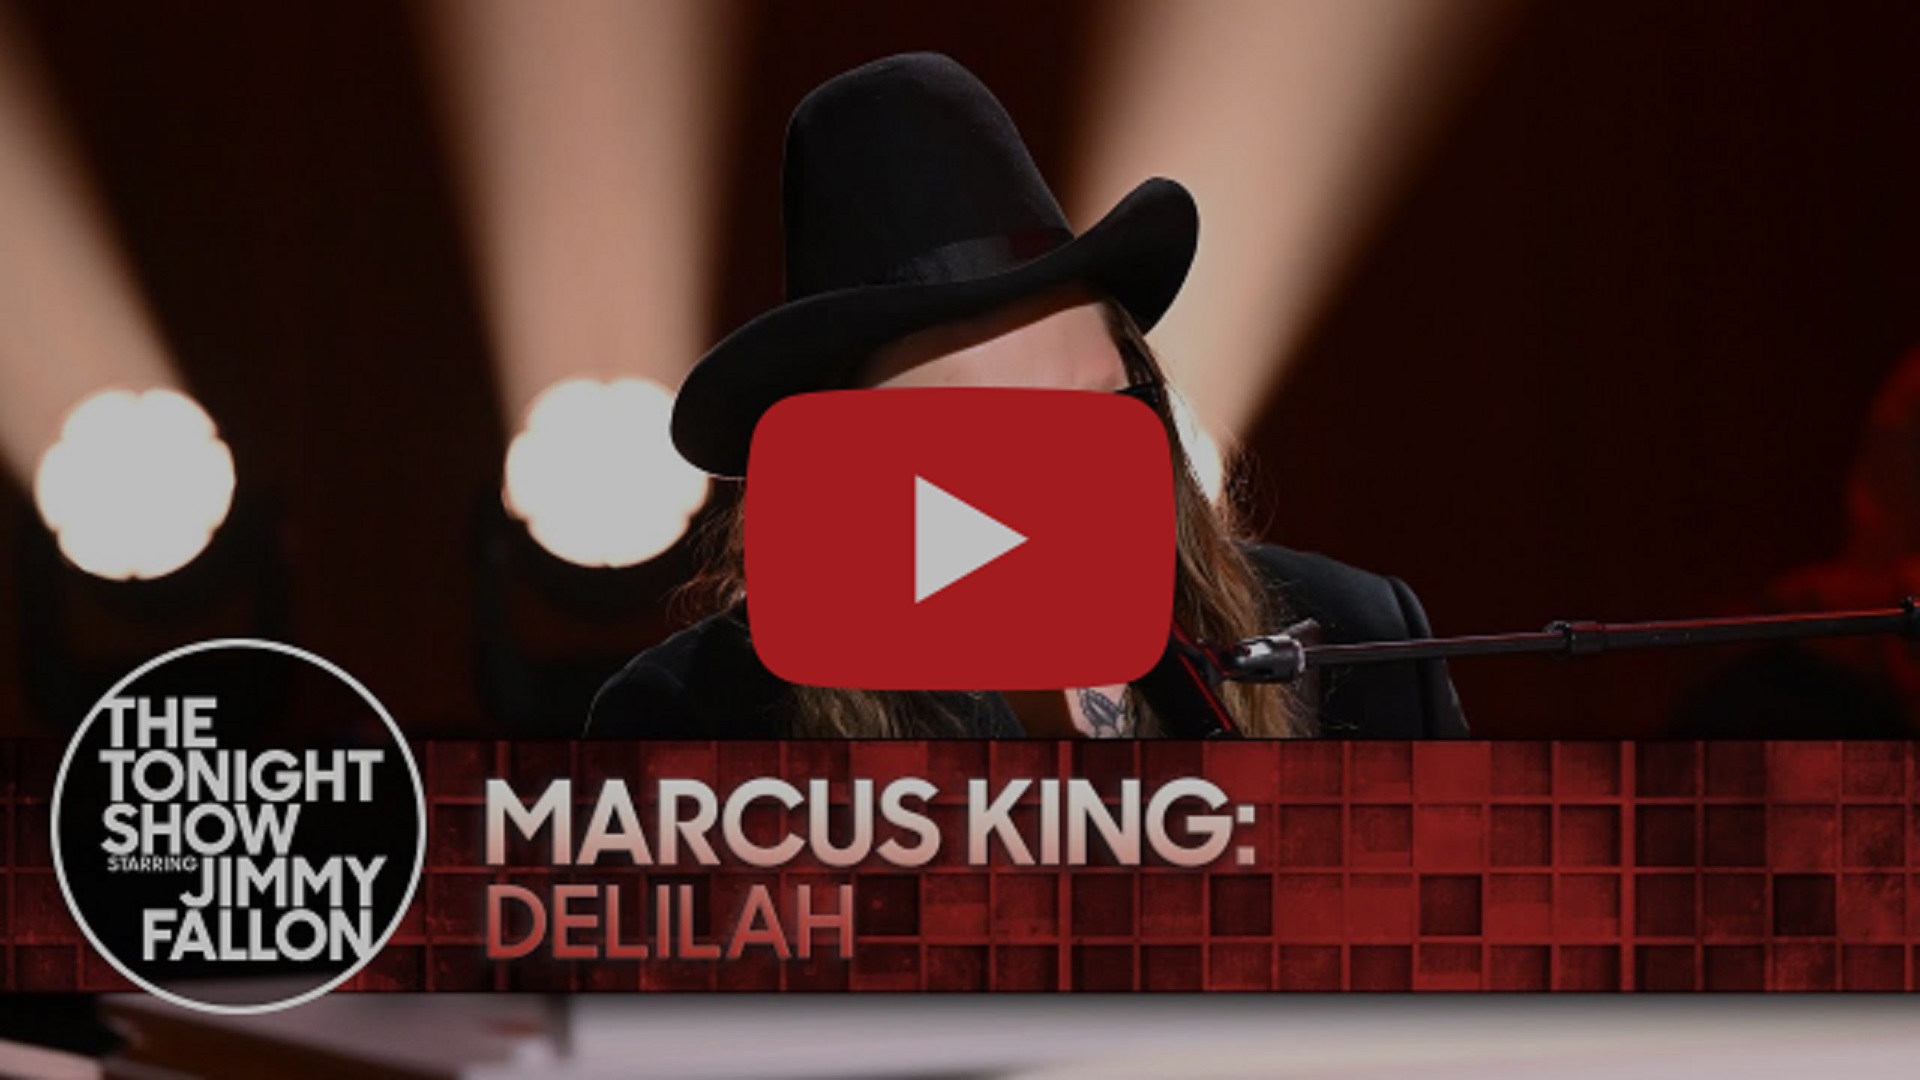 Marcus King performs new song 'Delilah' exclusively on the Tonight Show